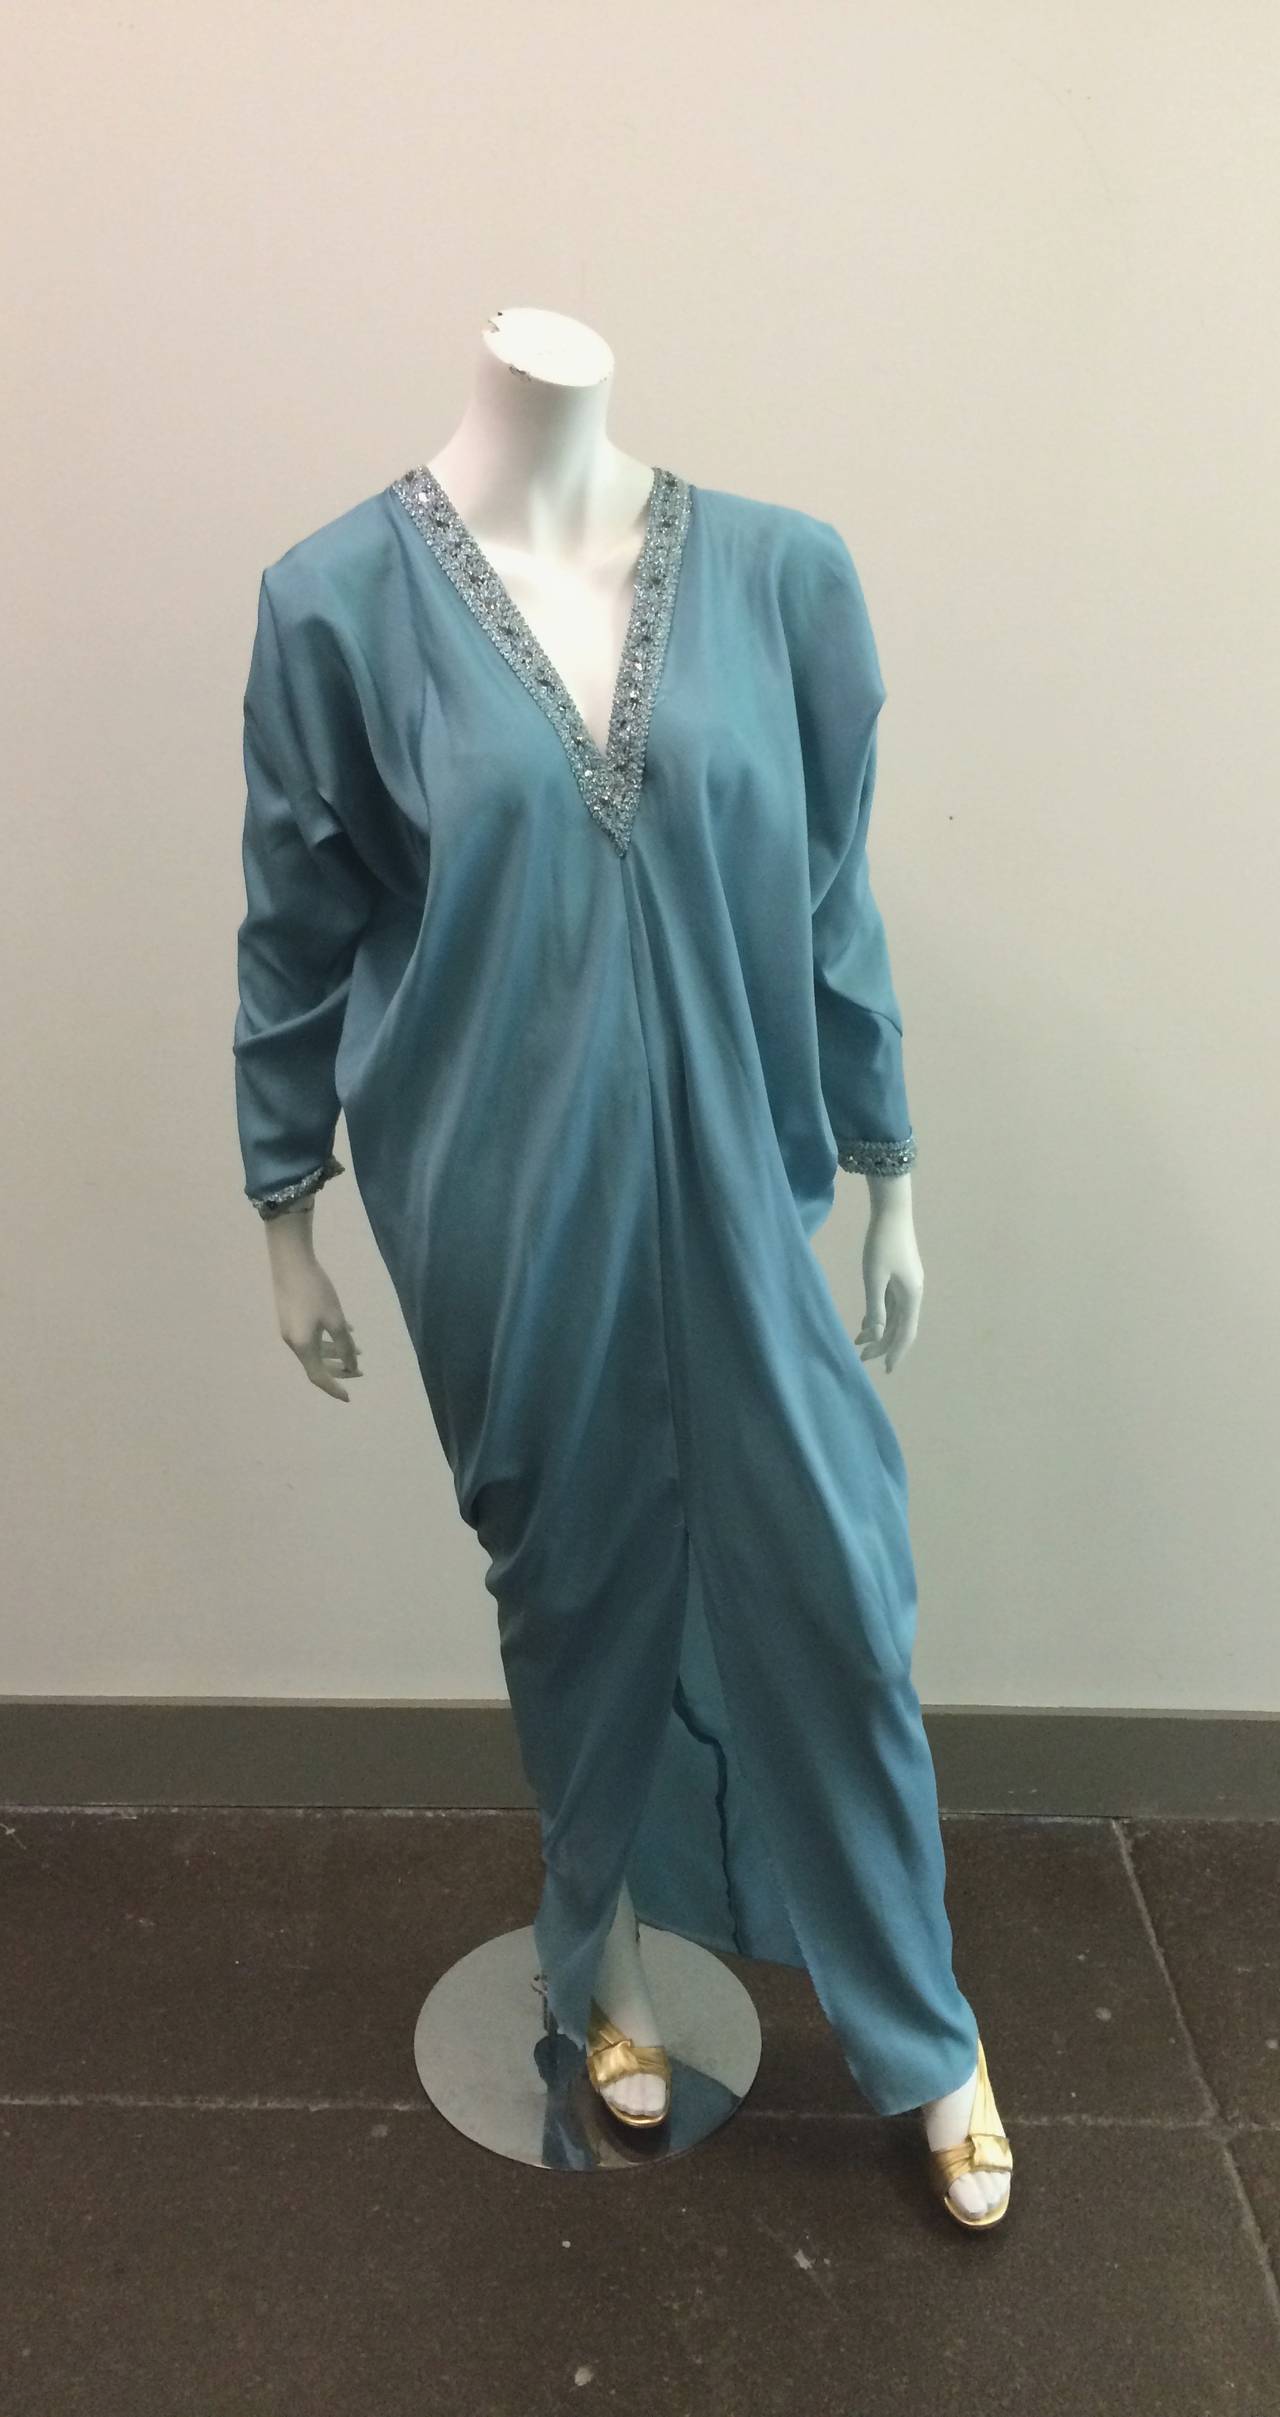 Halston 70s caftan / gown with beading trim and sash. 3